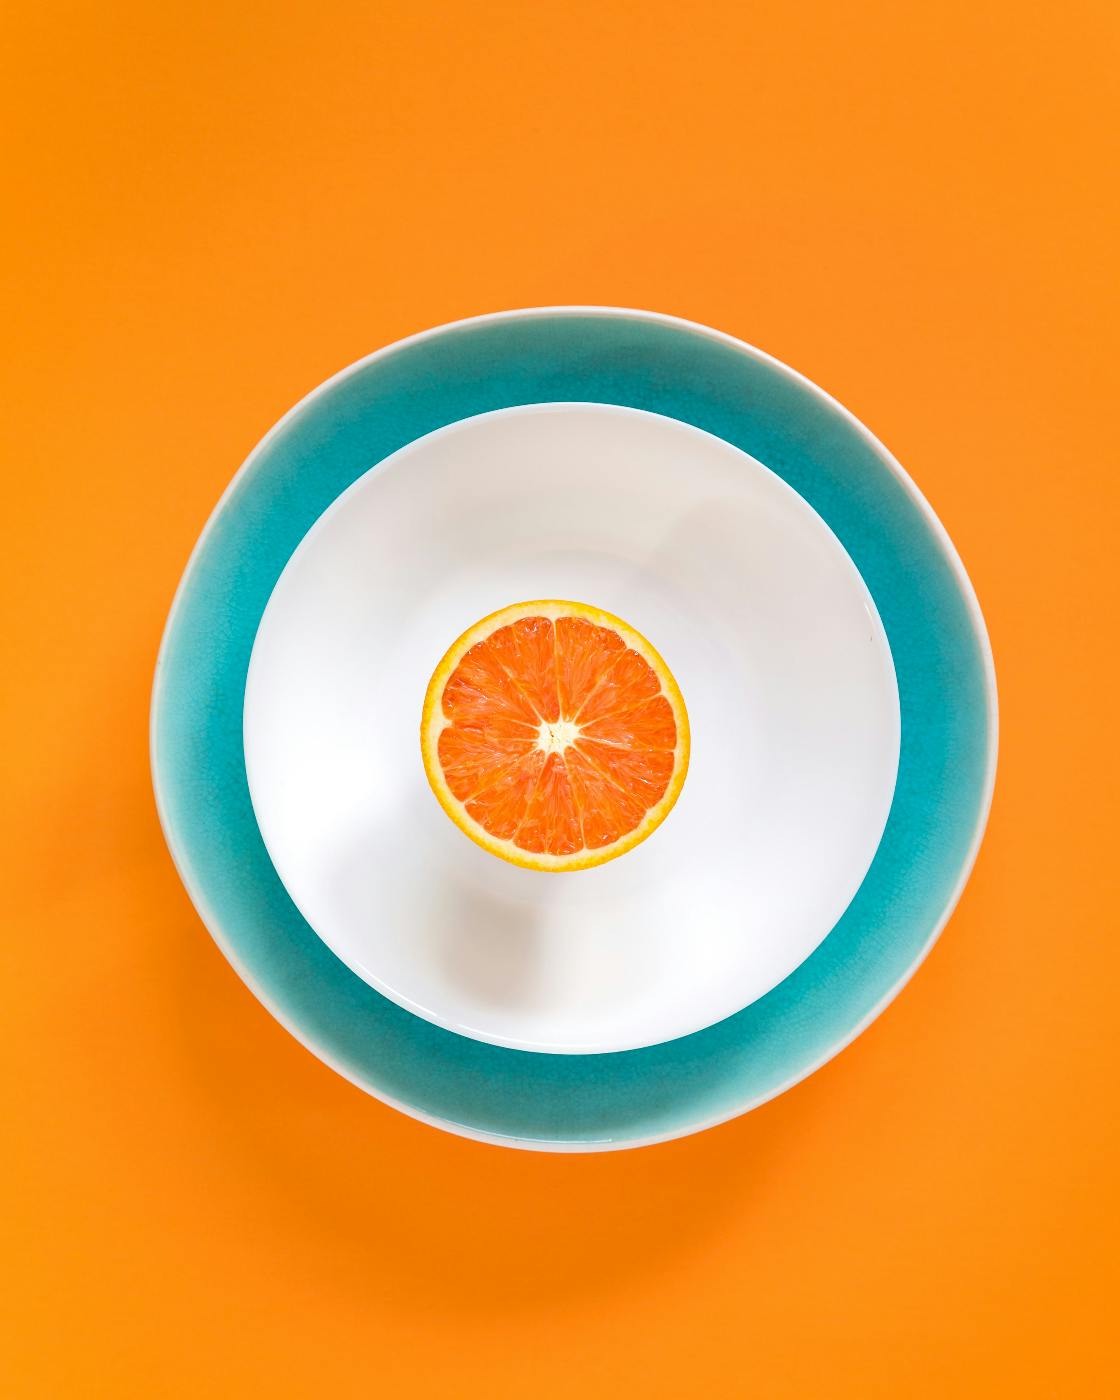 Half an orange sitting in a white bowl, on top of  a blue plate, on top of an orange background